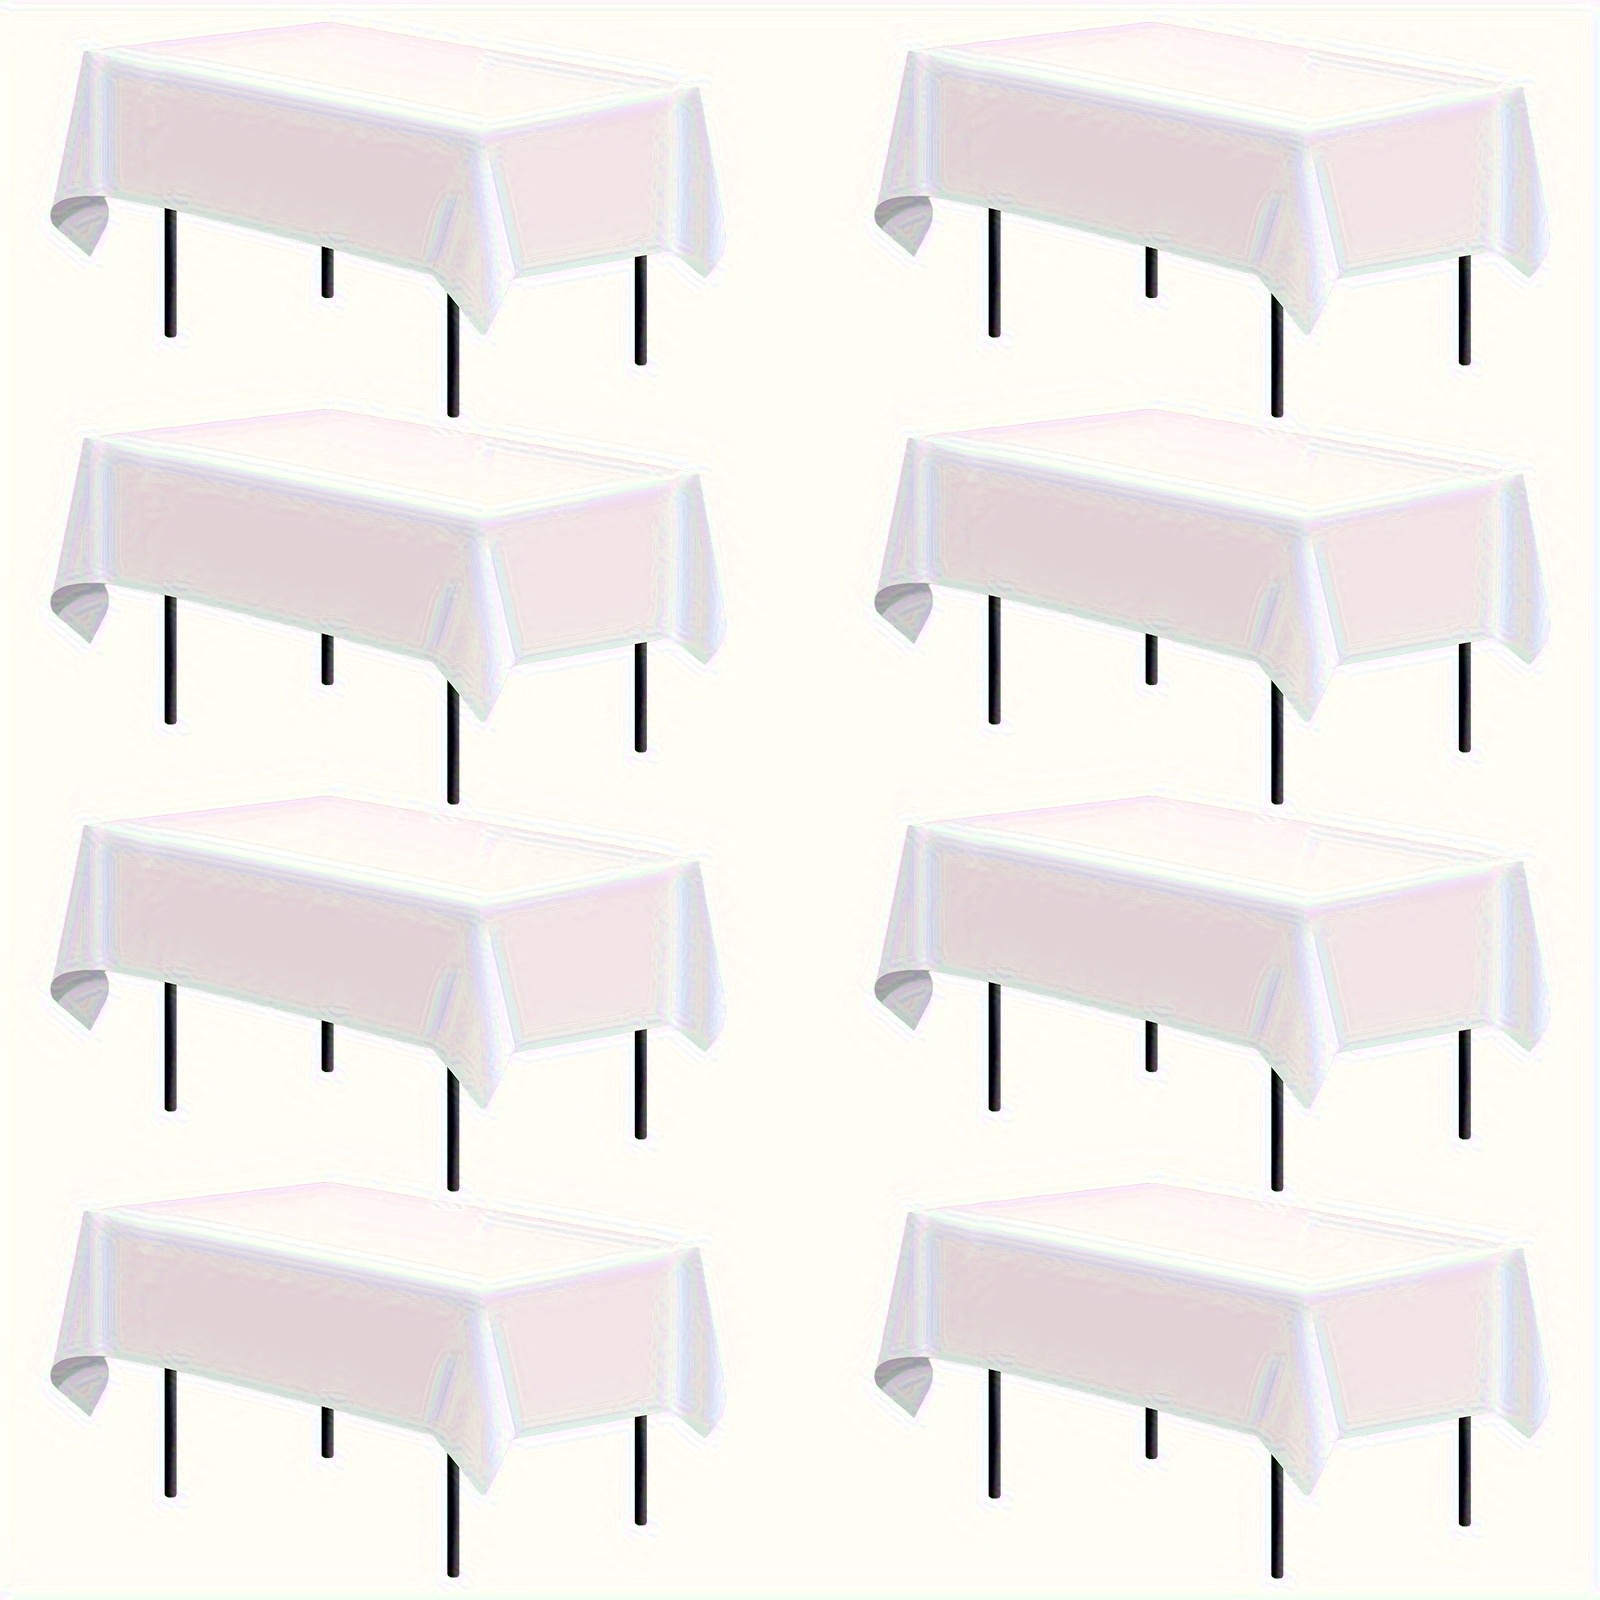 

8-piece Elegant Solid Color Plastic Tablecloths - Thick Peva, Perfect For Parties, Birthdays & Weddings - Timeless Black & White